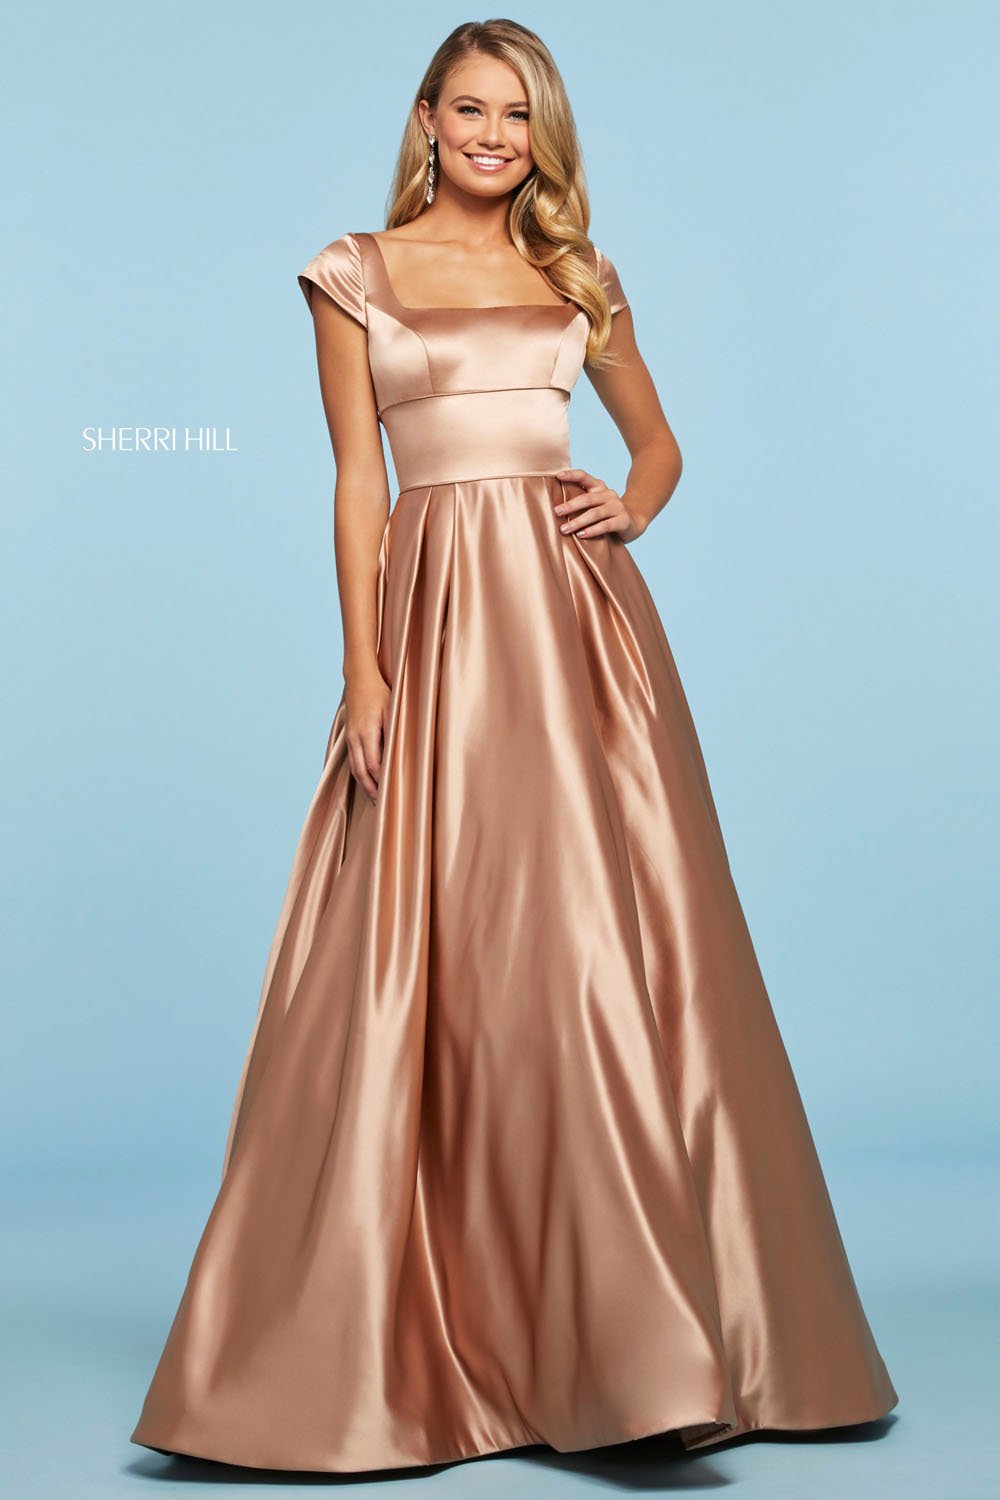 Sherri Hill 53314 dress images in these colors: Candy Pink, Mocha, Yellow, Ivory, Blush, Light Blue, Emerald, Lilac, Red.